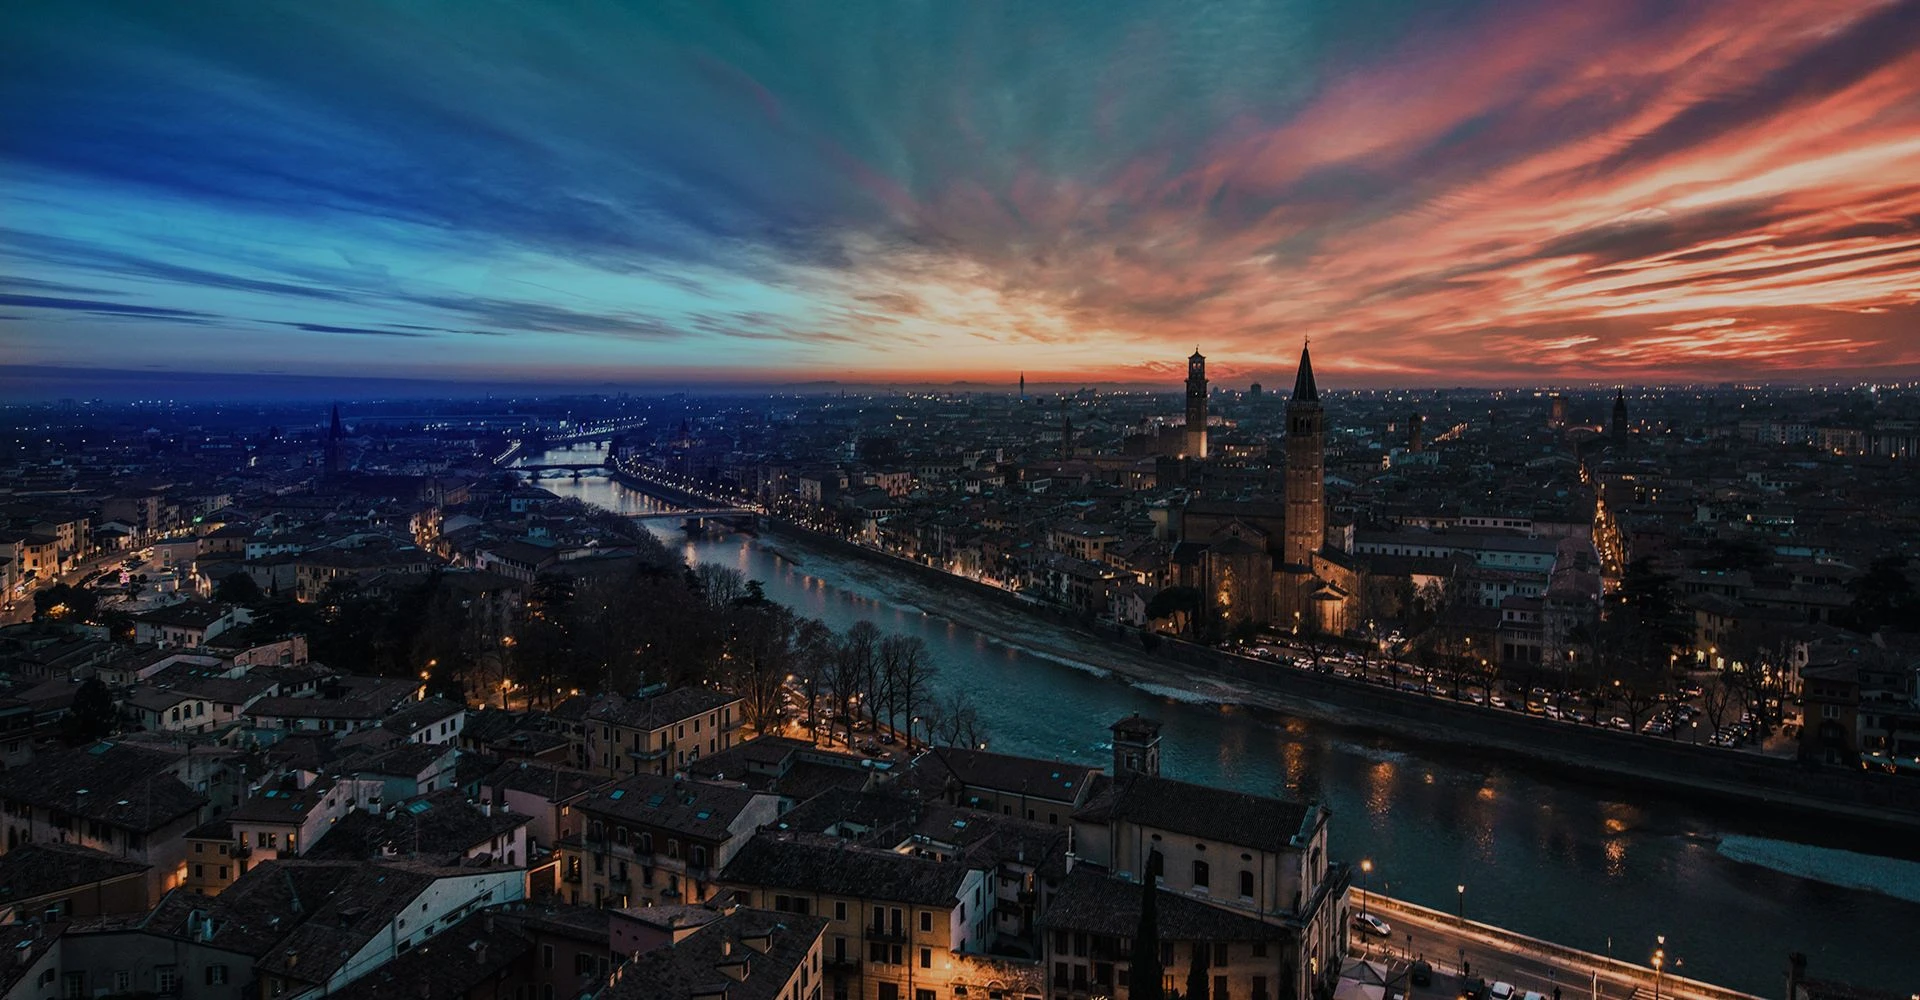 News and Curiosities about Verona and surroundings